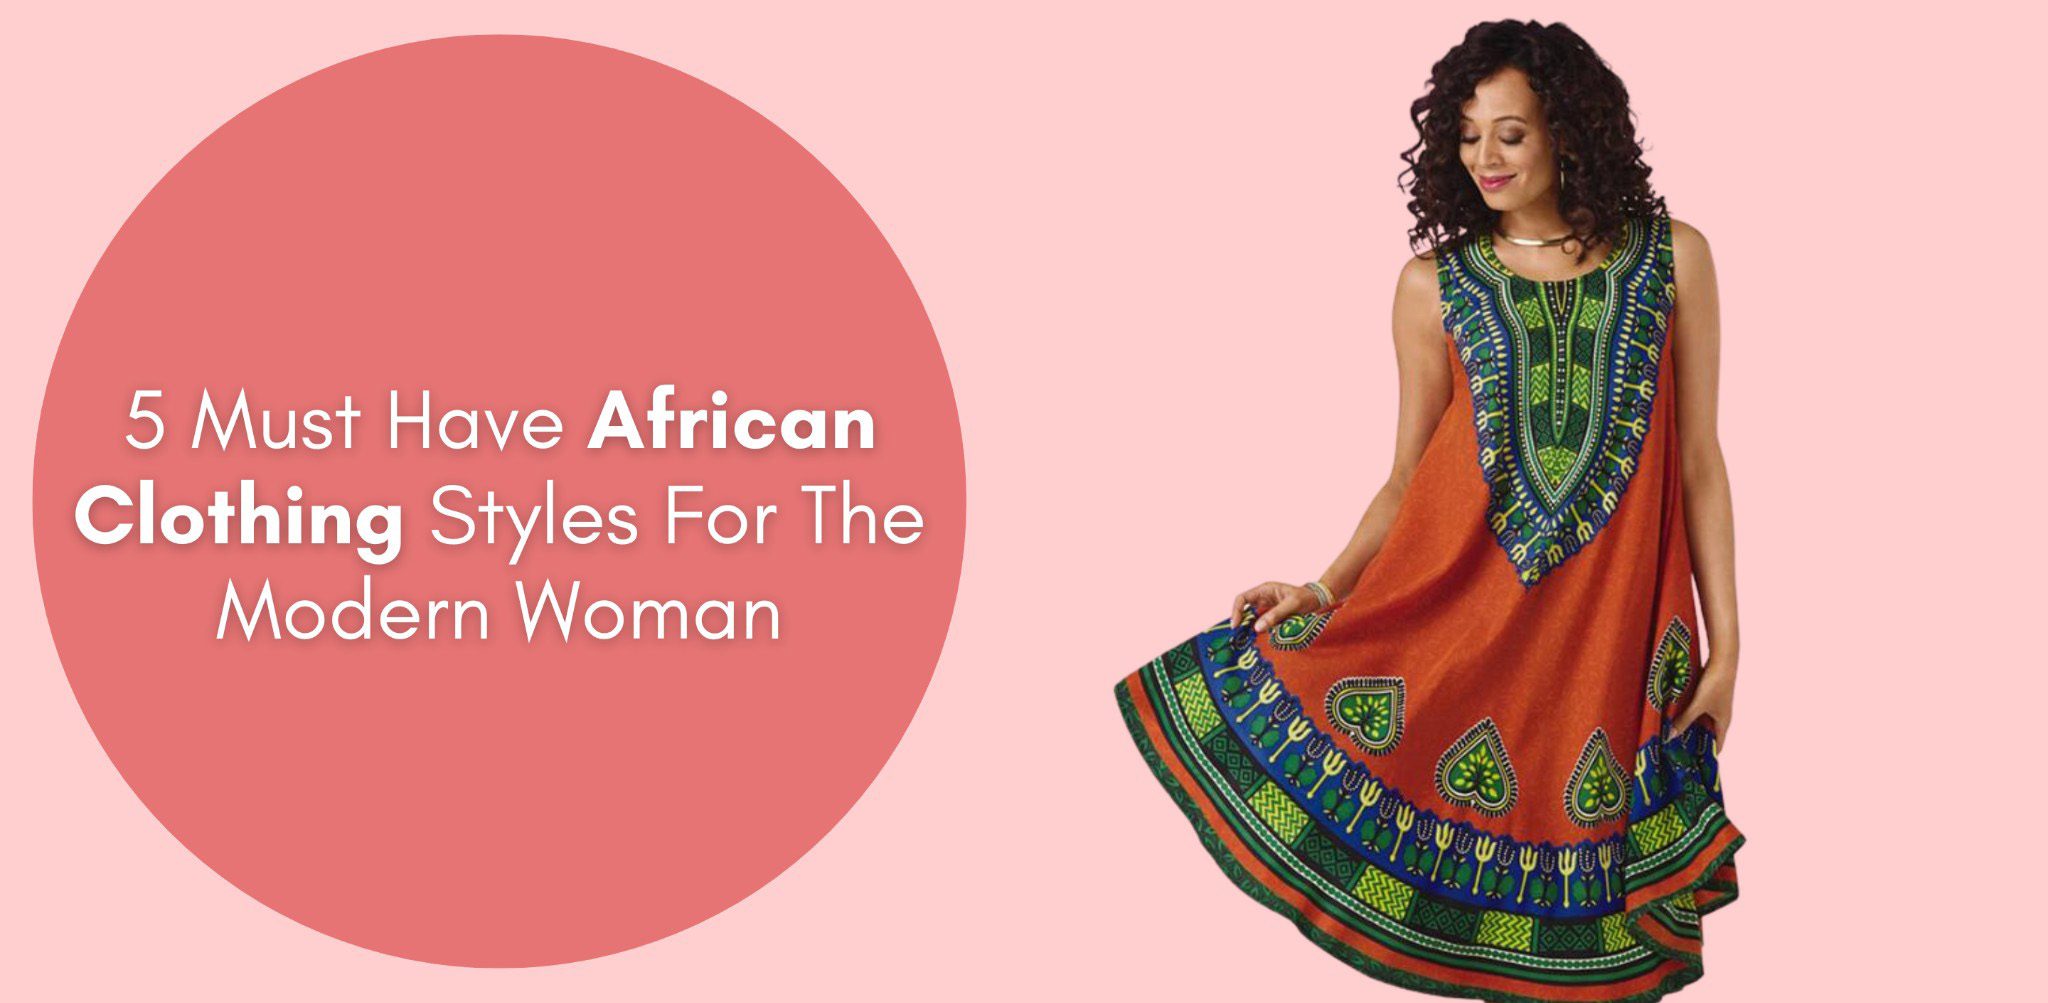 5 Must Have African Clothing Styles For The Modern Woman